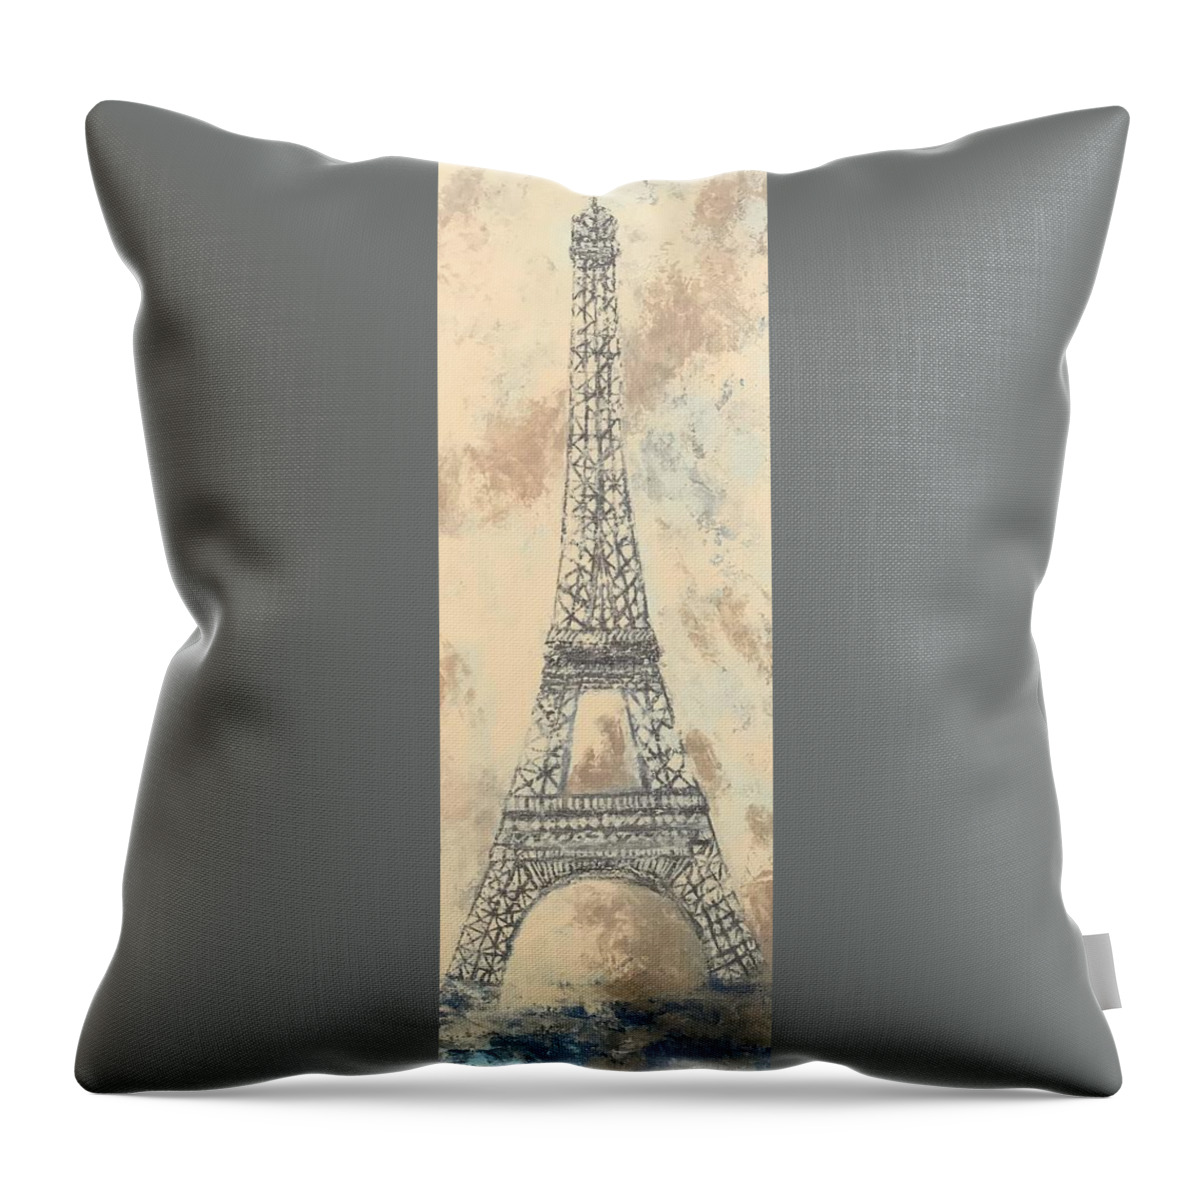 Eiffel Tower Throw Pillow featuring the painting Christian's Paris by Torrie Smiley